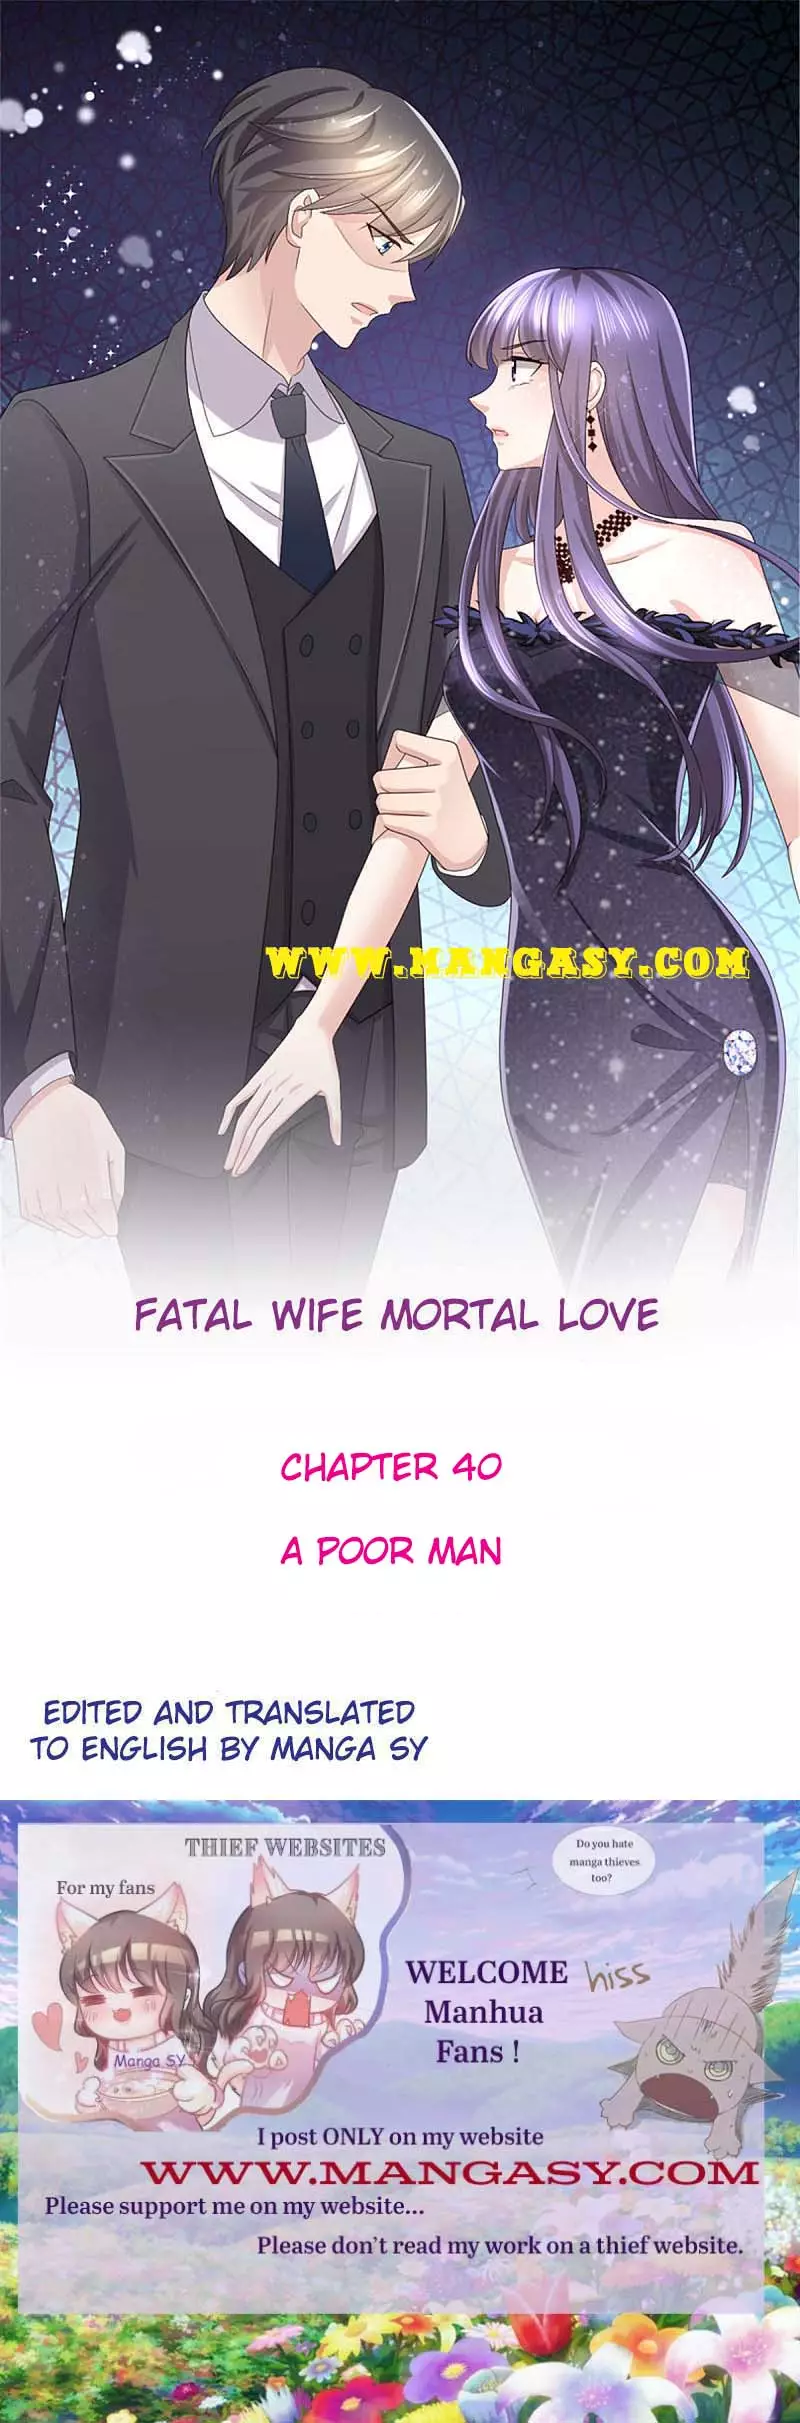 A Deadly Sexy Wife: The Ceo Wants To Remarry - 40 page 1-222624b9